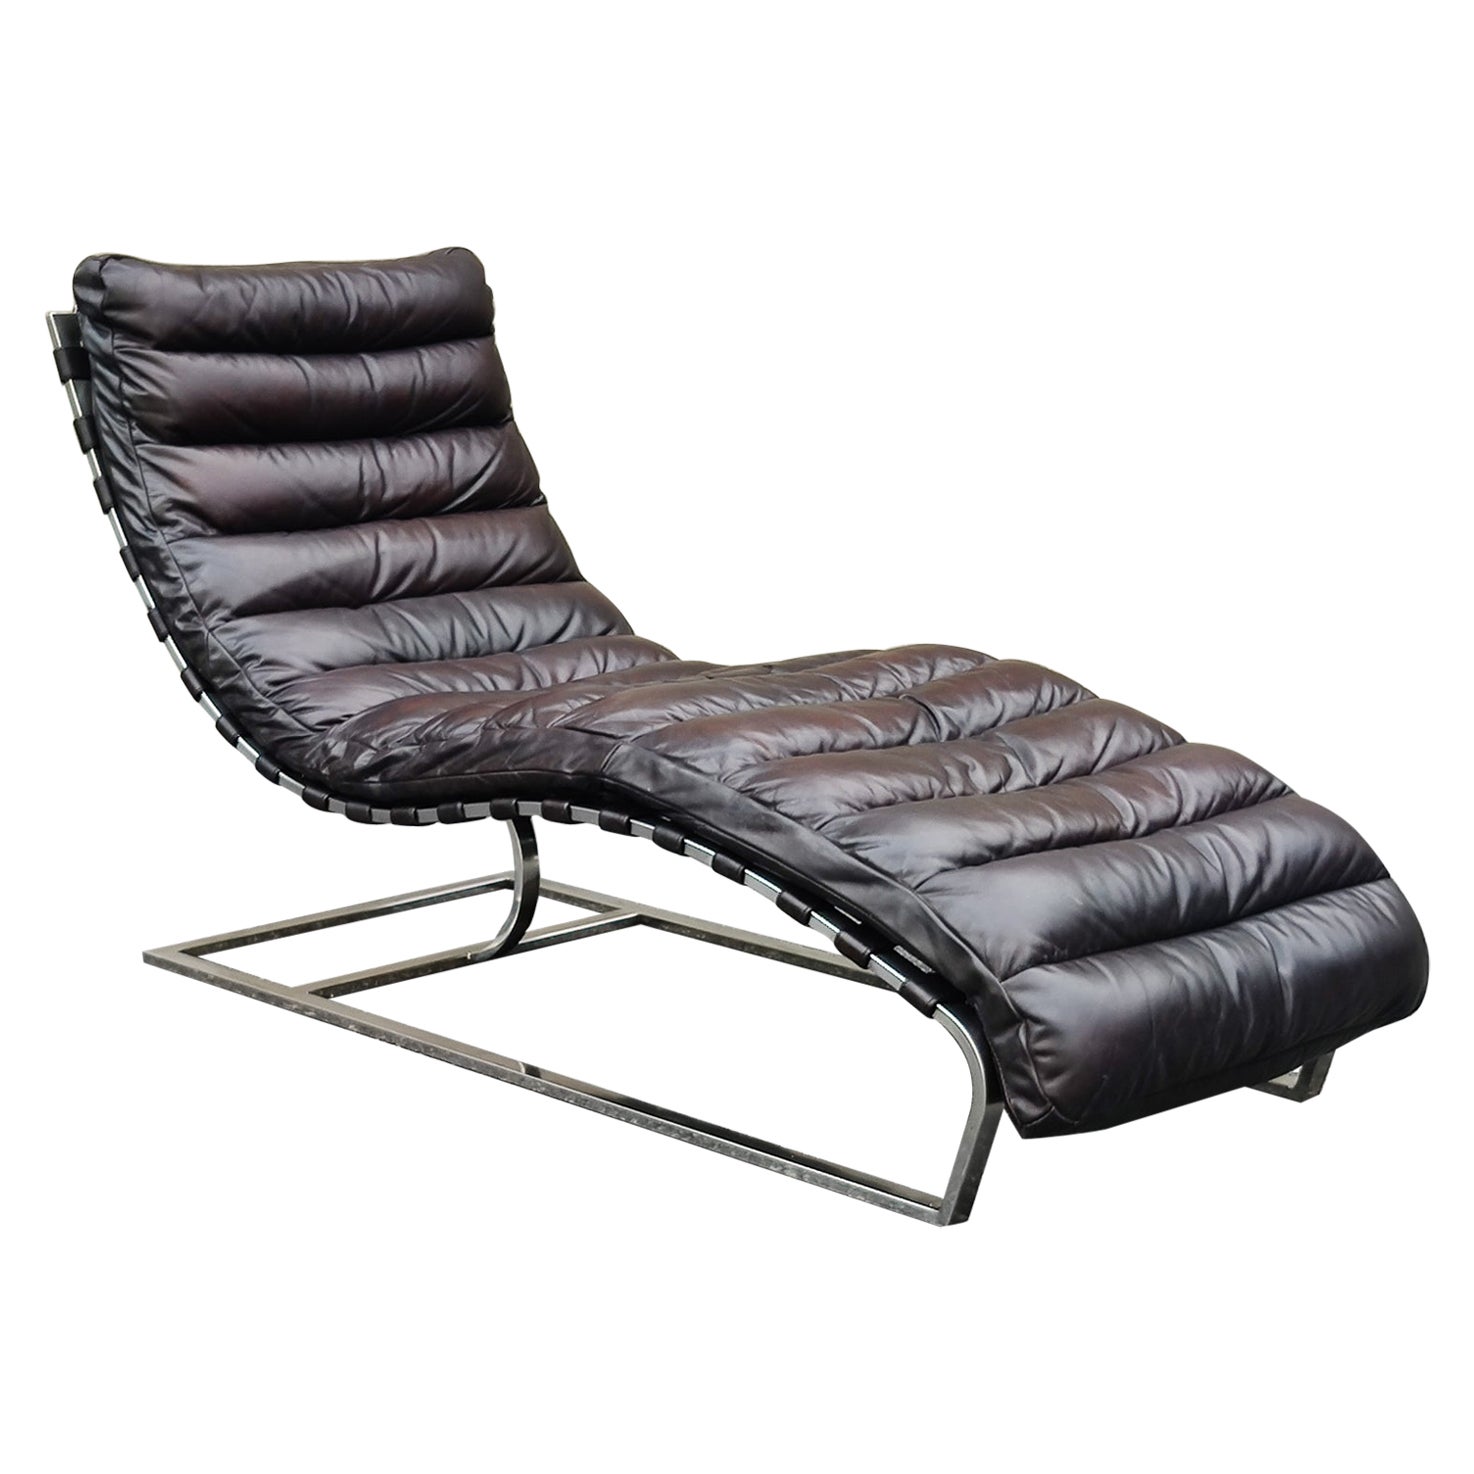 Restoration Hardware Oviedo Espresso Leather Chrome-Frame Chaise Lounge Chair For Sale